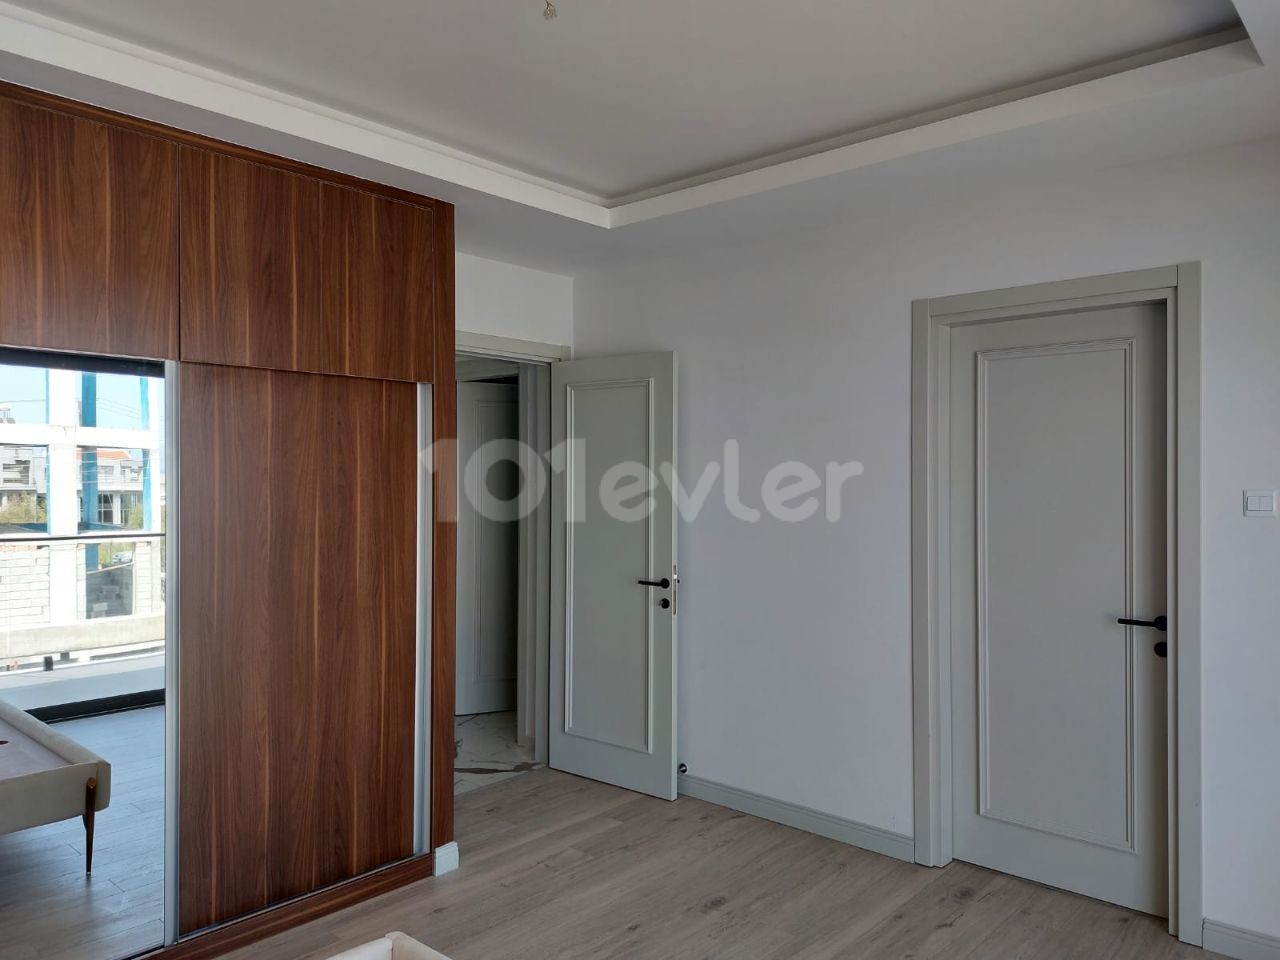 Brand new luxury 3 and 4 bedroom villa for sale in Çatalköy ** 